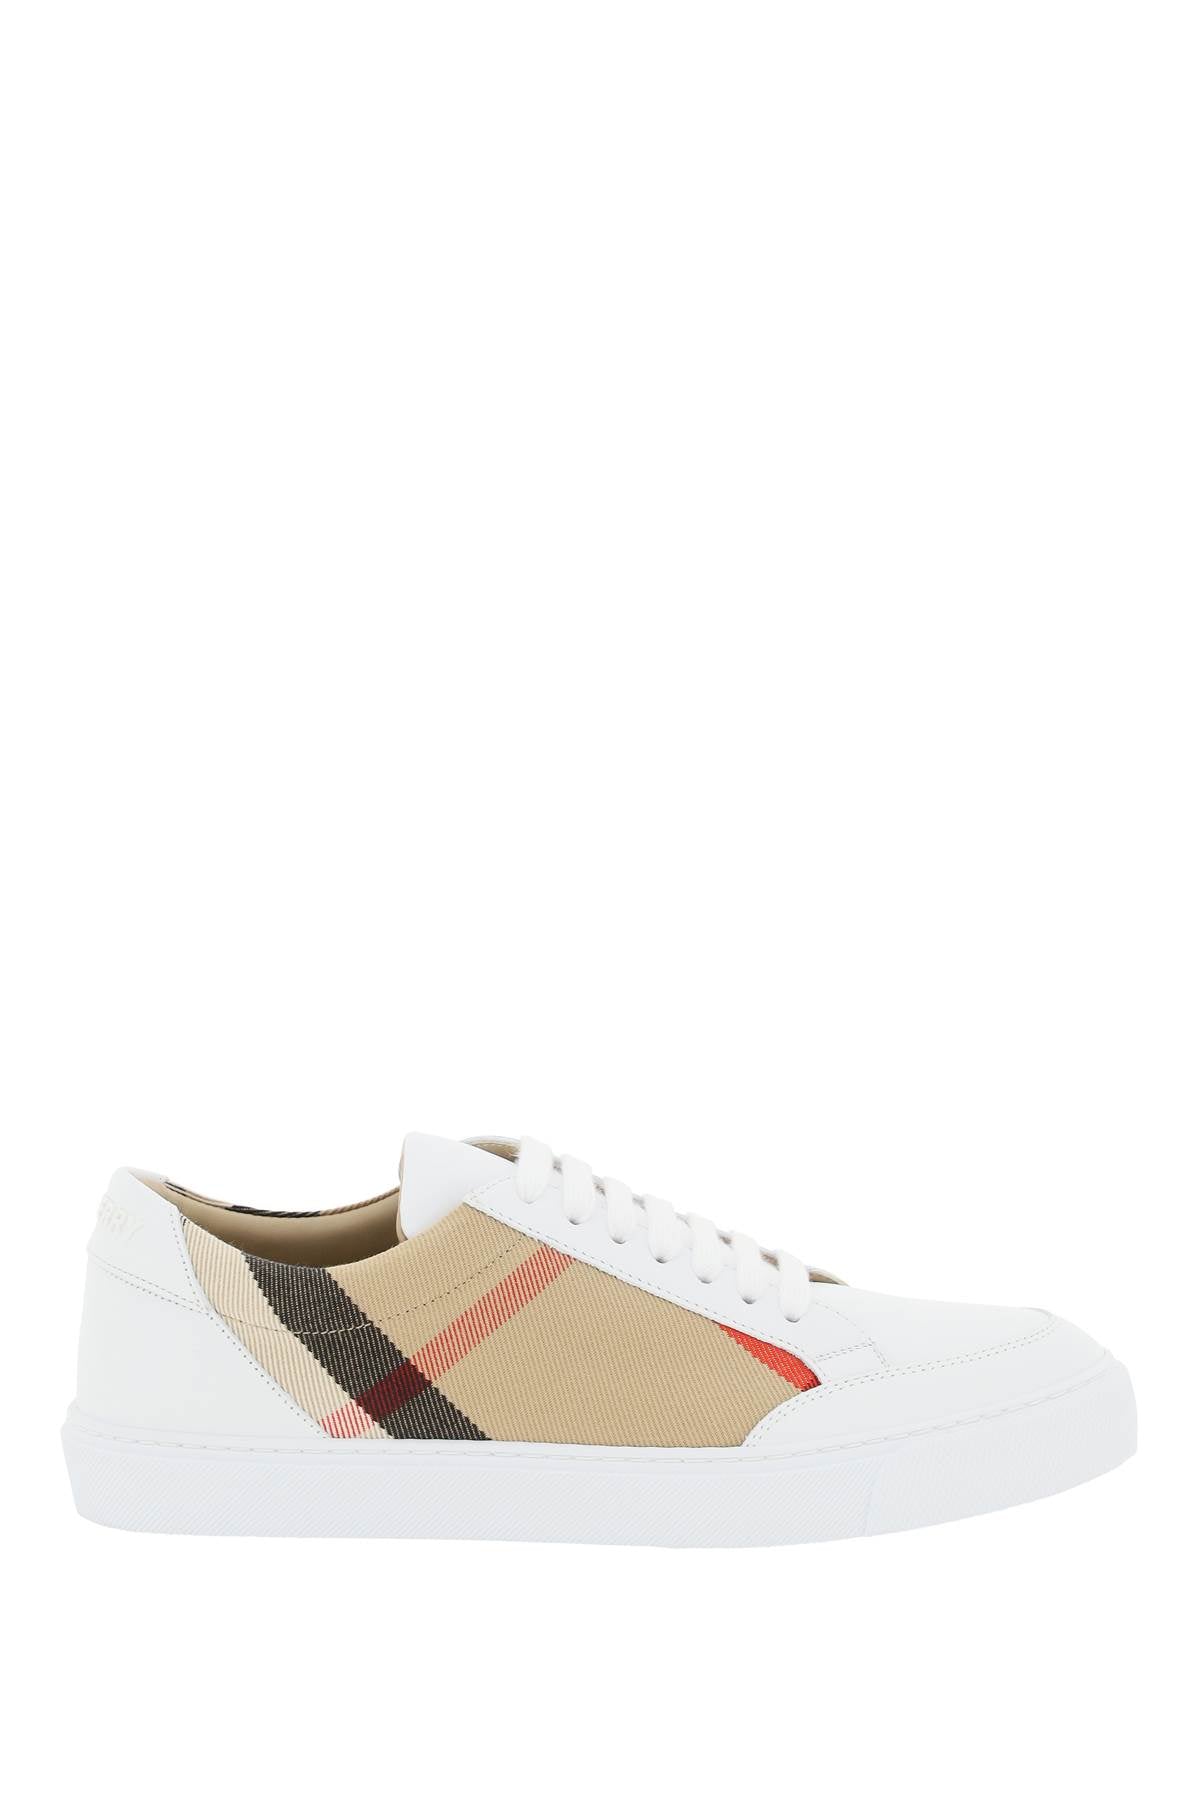 Burberry Check Cotton And Leather Sneakers White